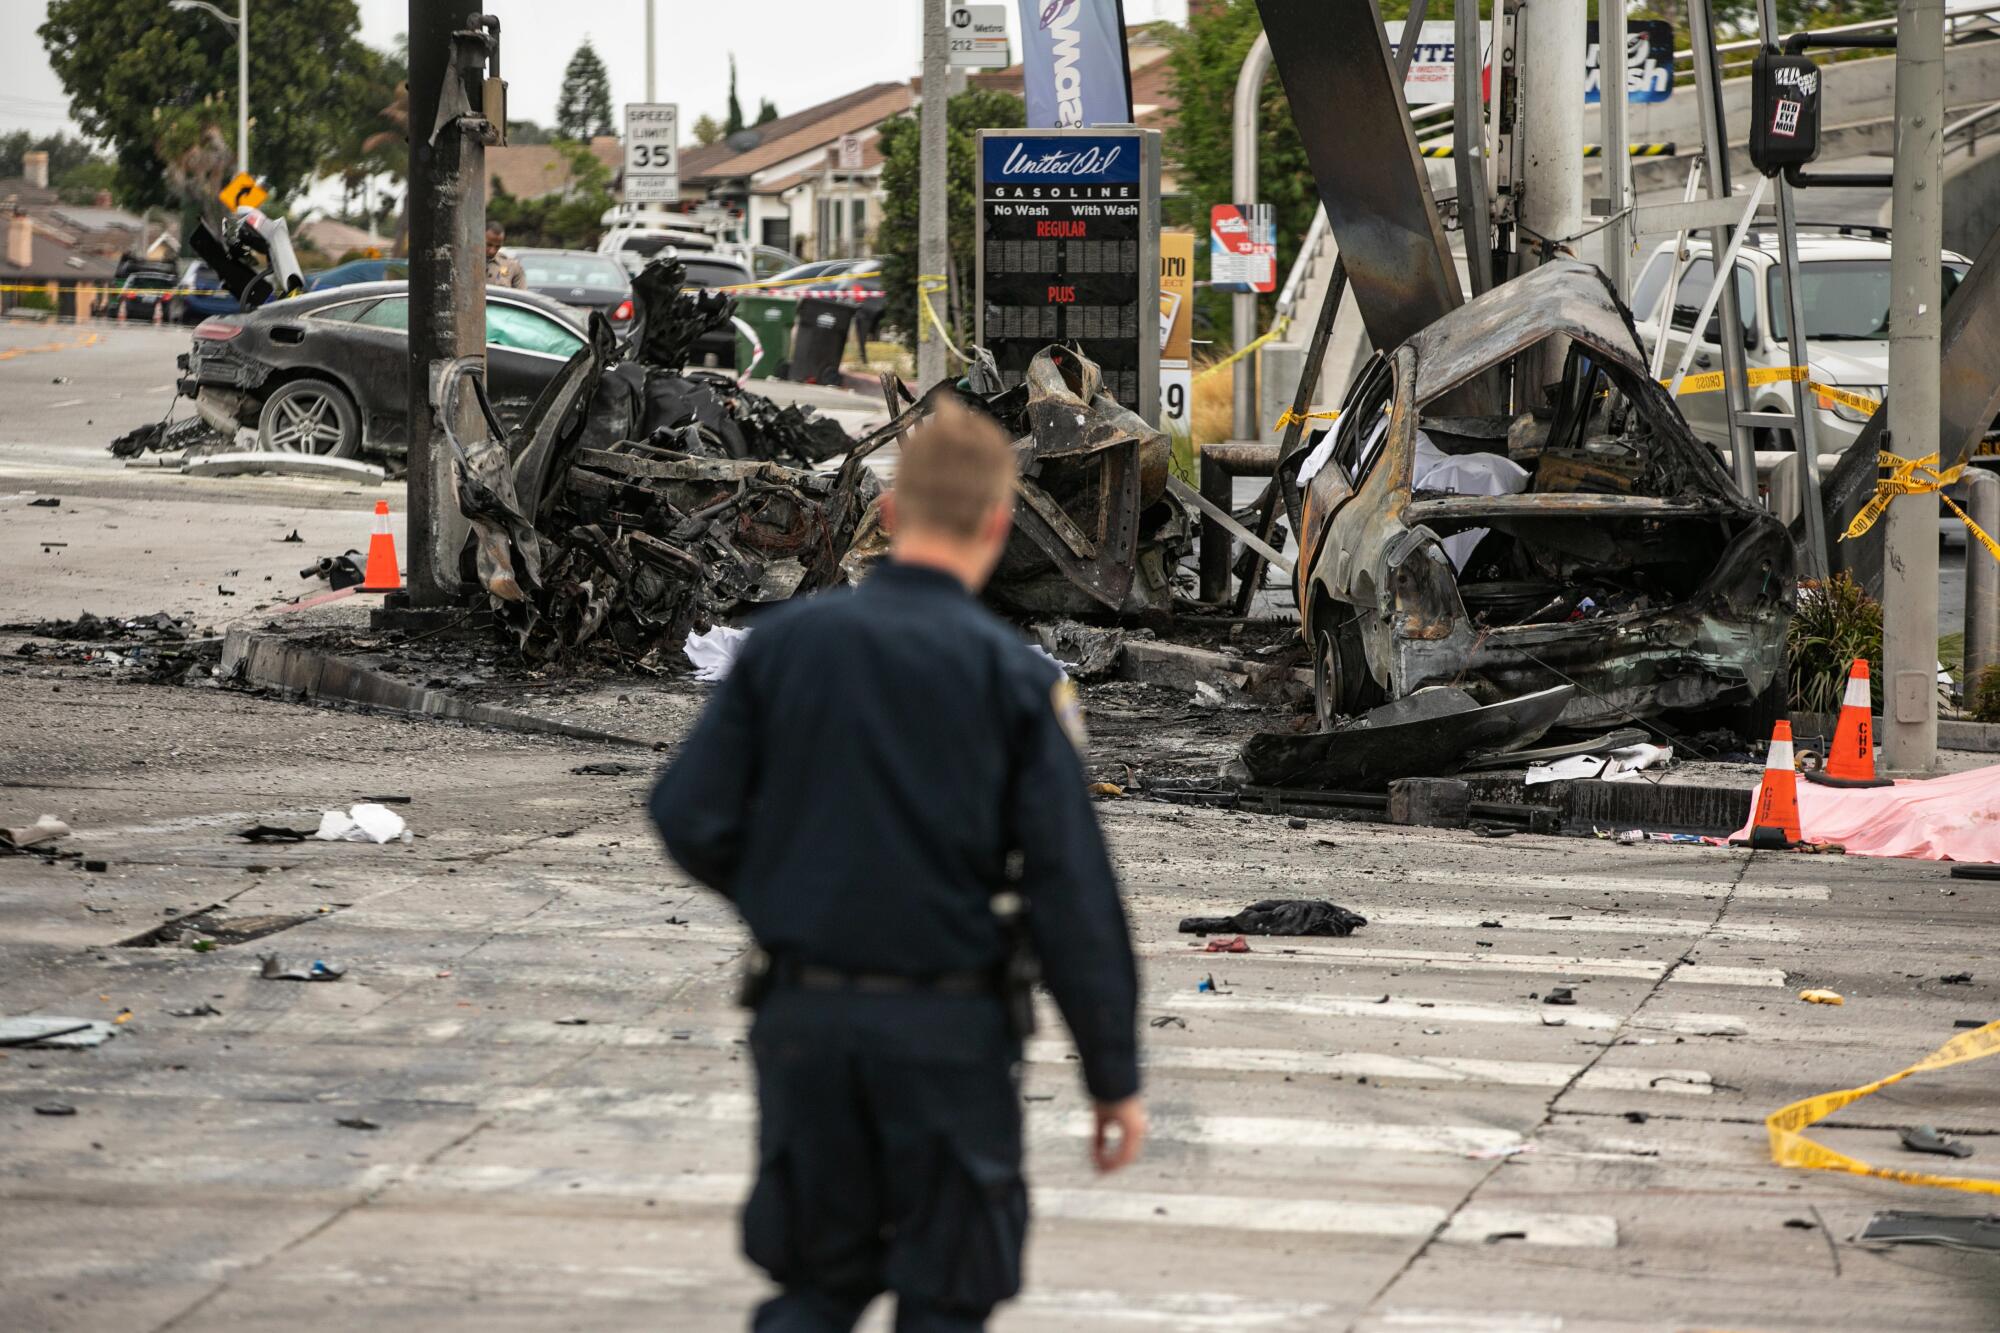 An officer looks over the scene of a fiery crash.